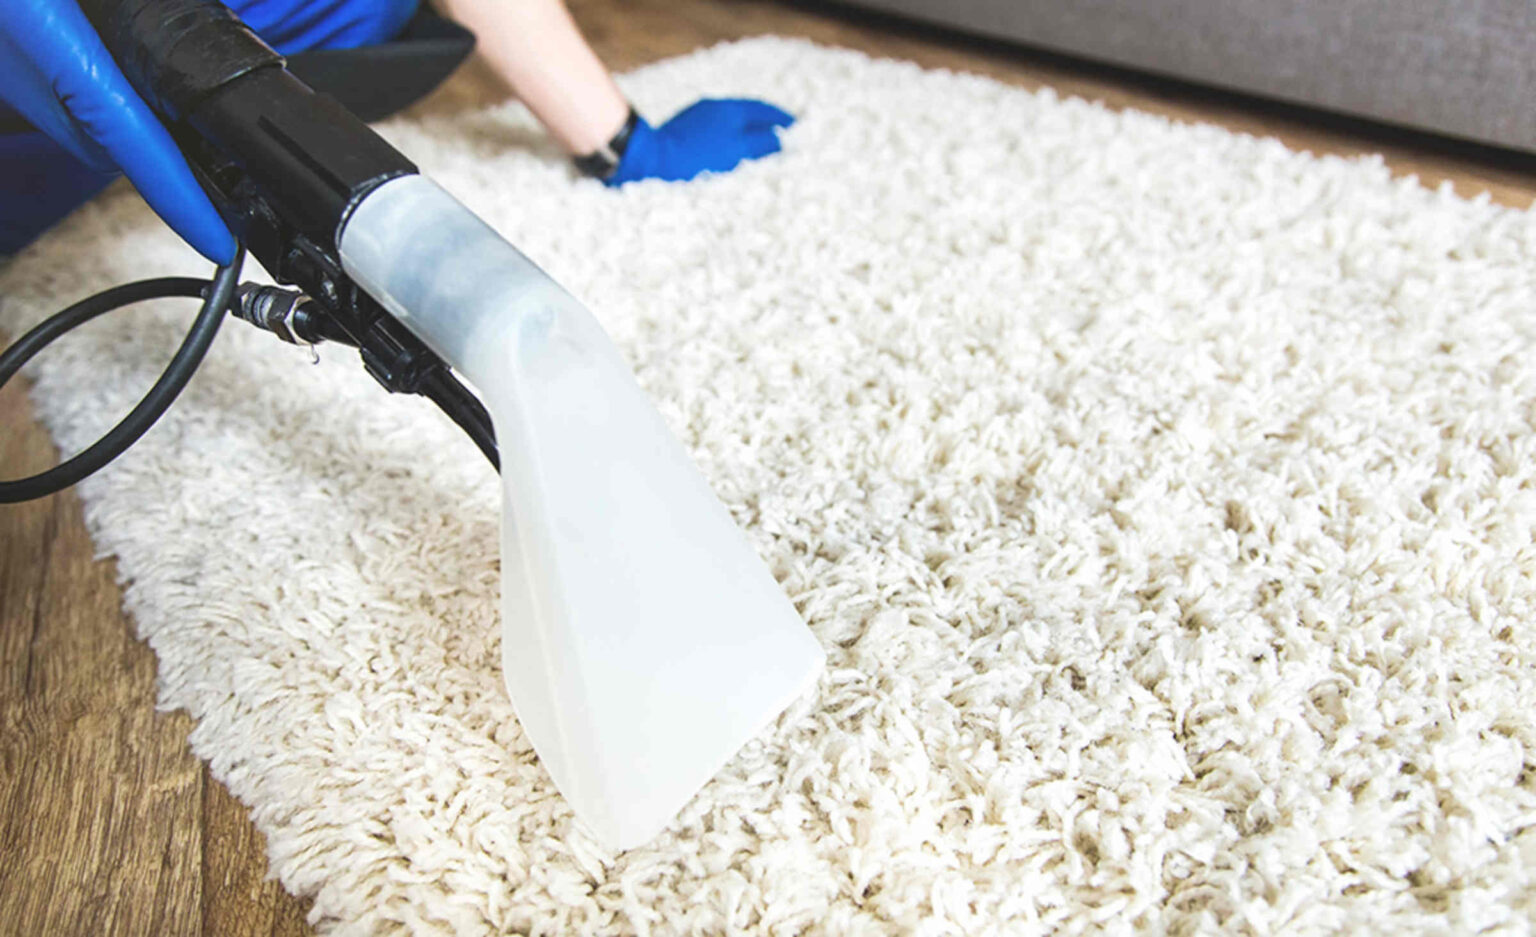 No more beating at carpets with a broom just to end up inhaling dust particles. Use these helpful tips to easily clean a rug in your home!